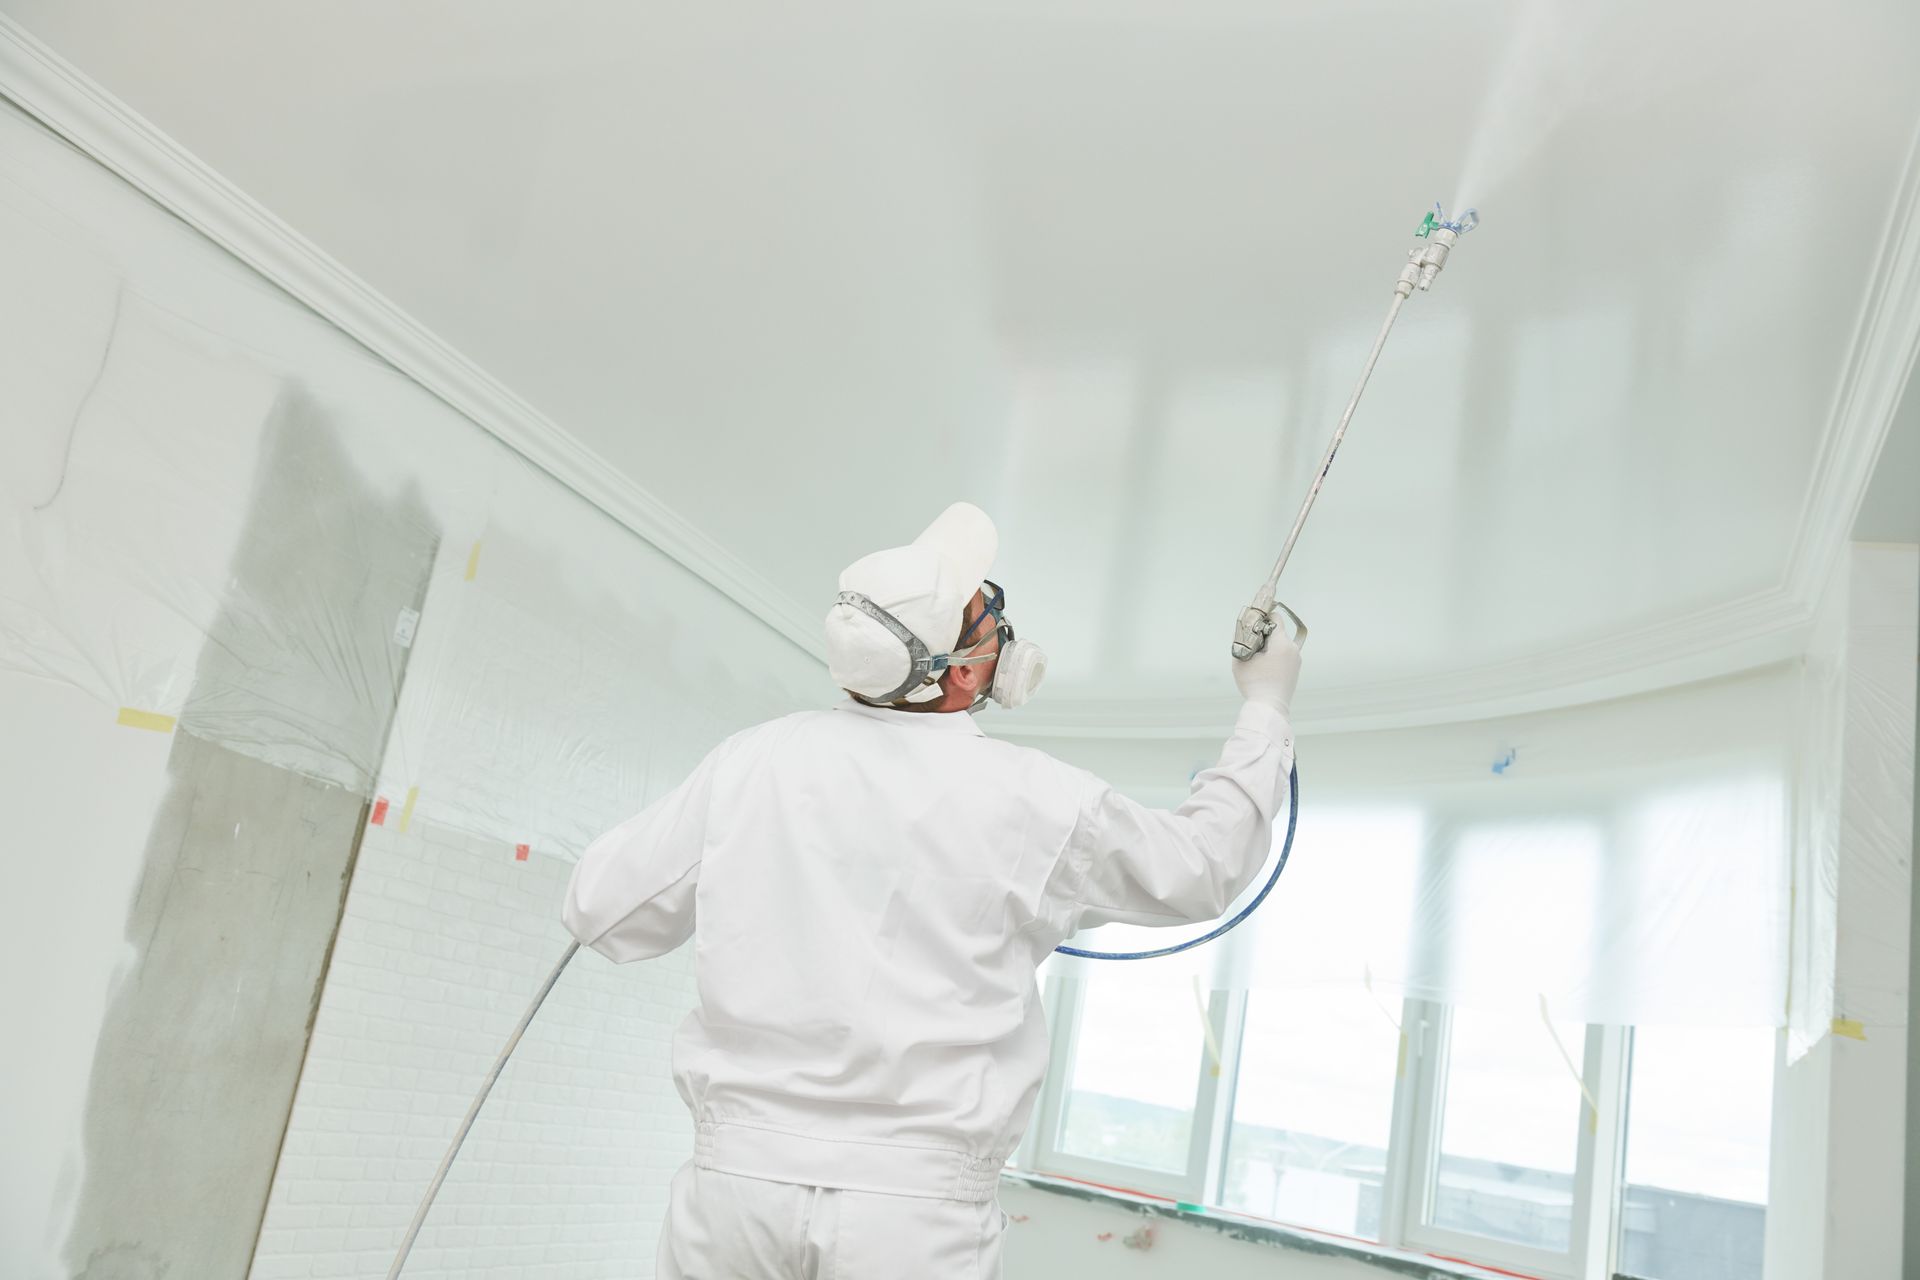 A painter using an airless painting sprayer to cover the ceiling surface with white paint.